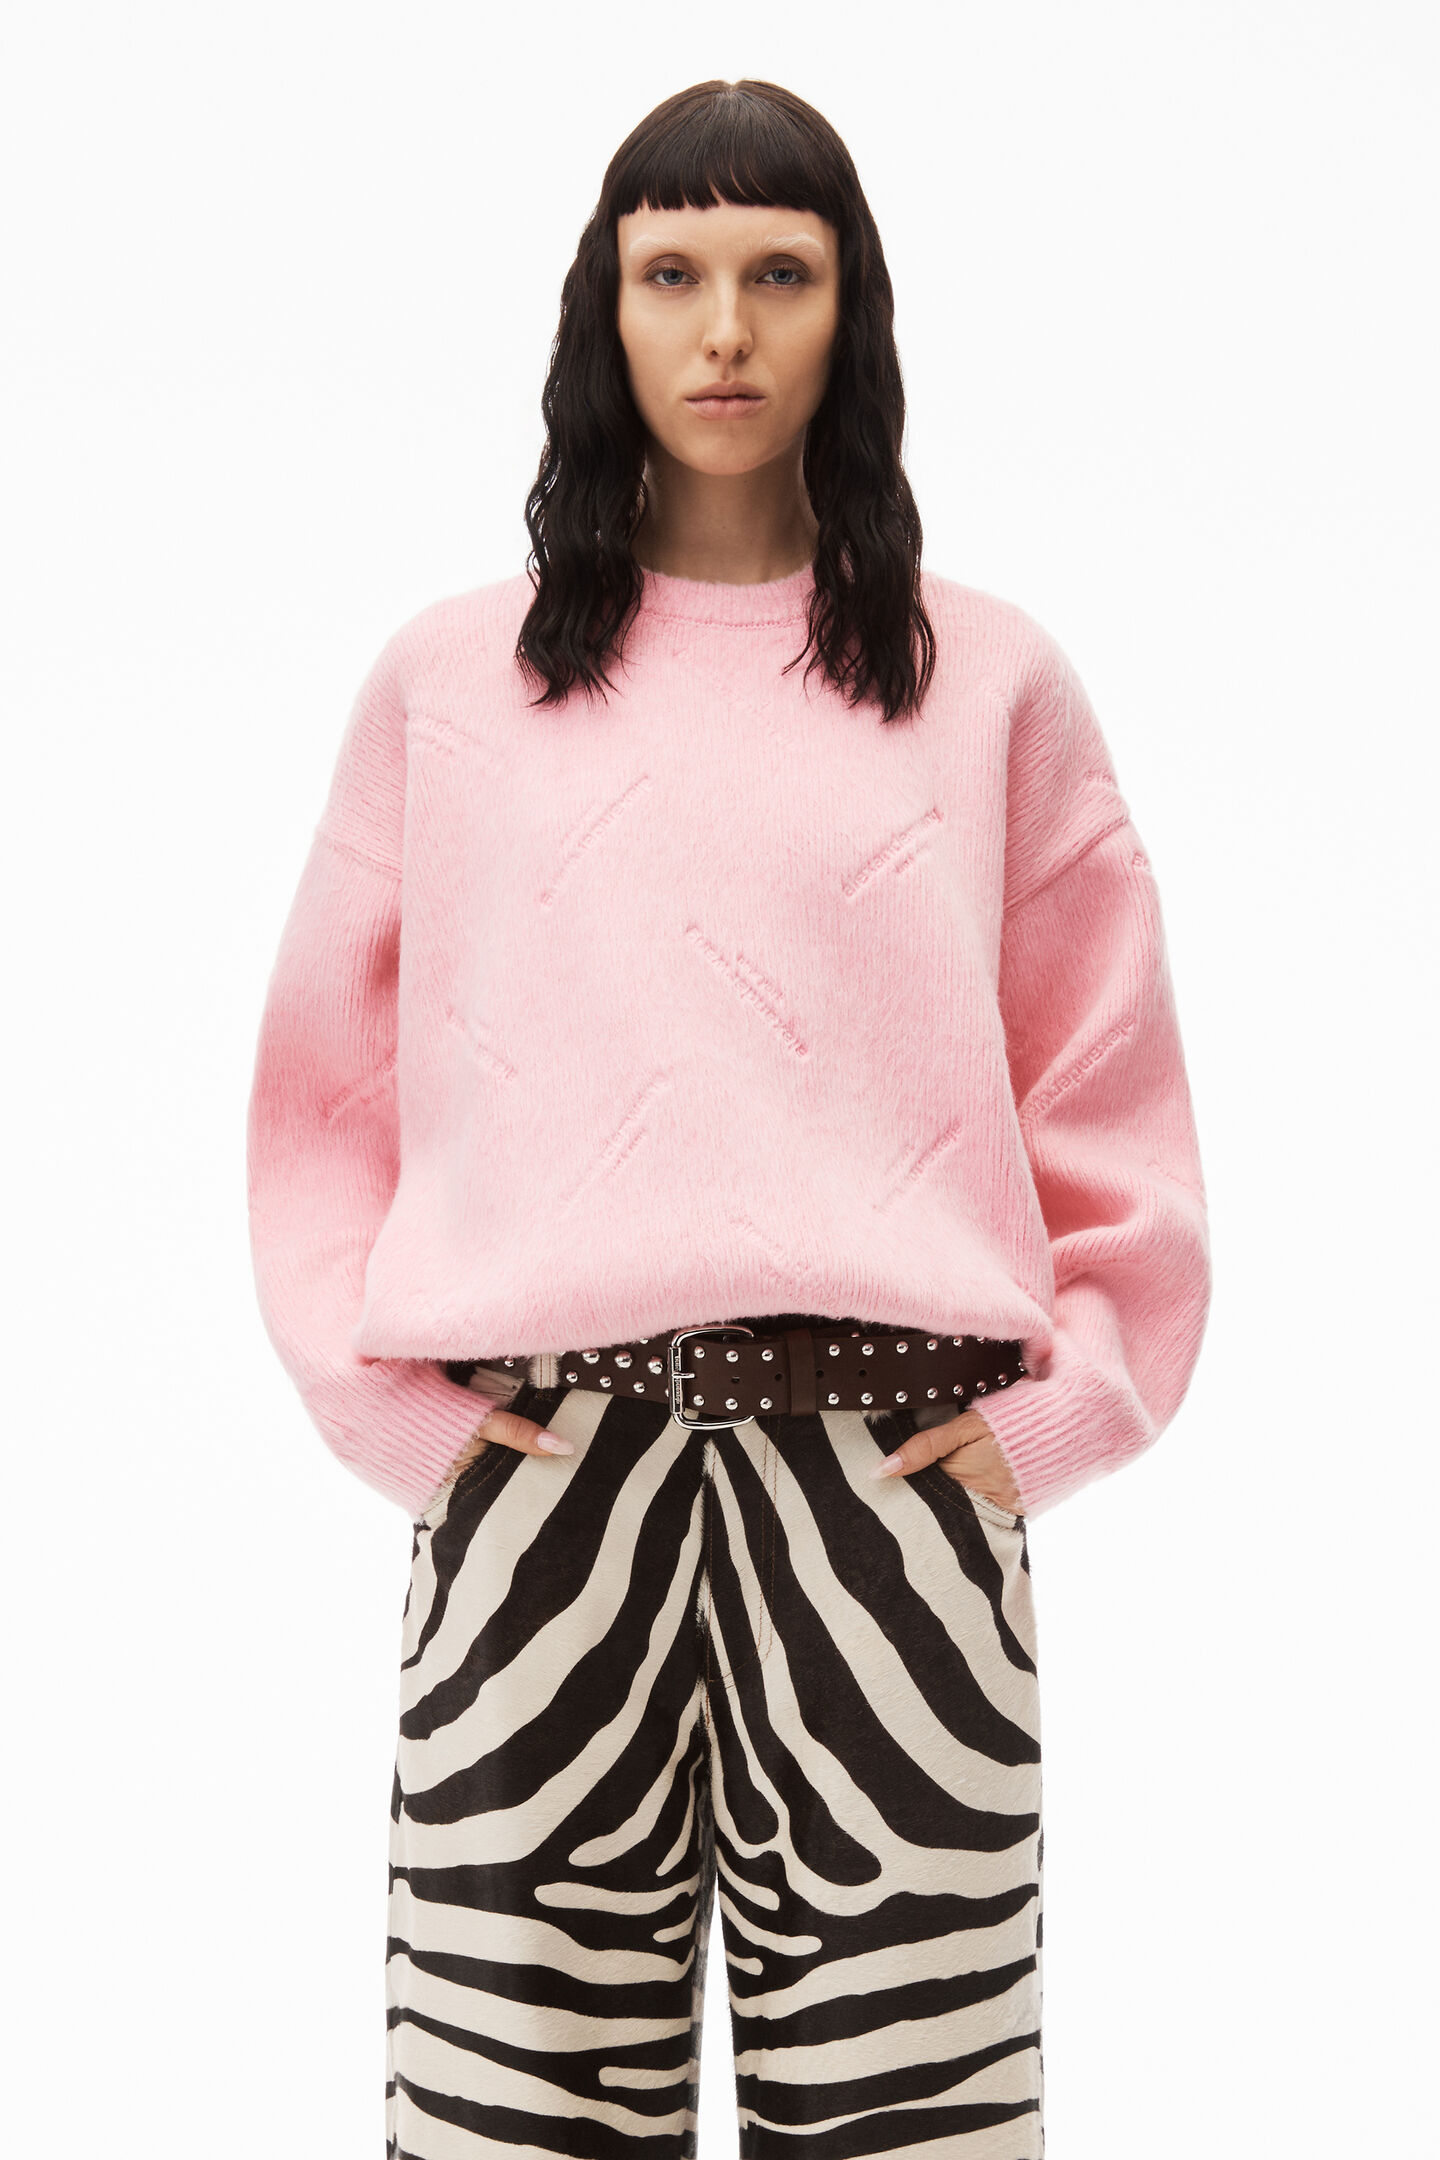 T BY ALEXANDER WANG T By Alexander Wang Women's Pink Other Materials Shorts  - Stylemyle